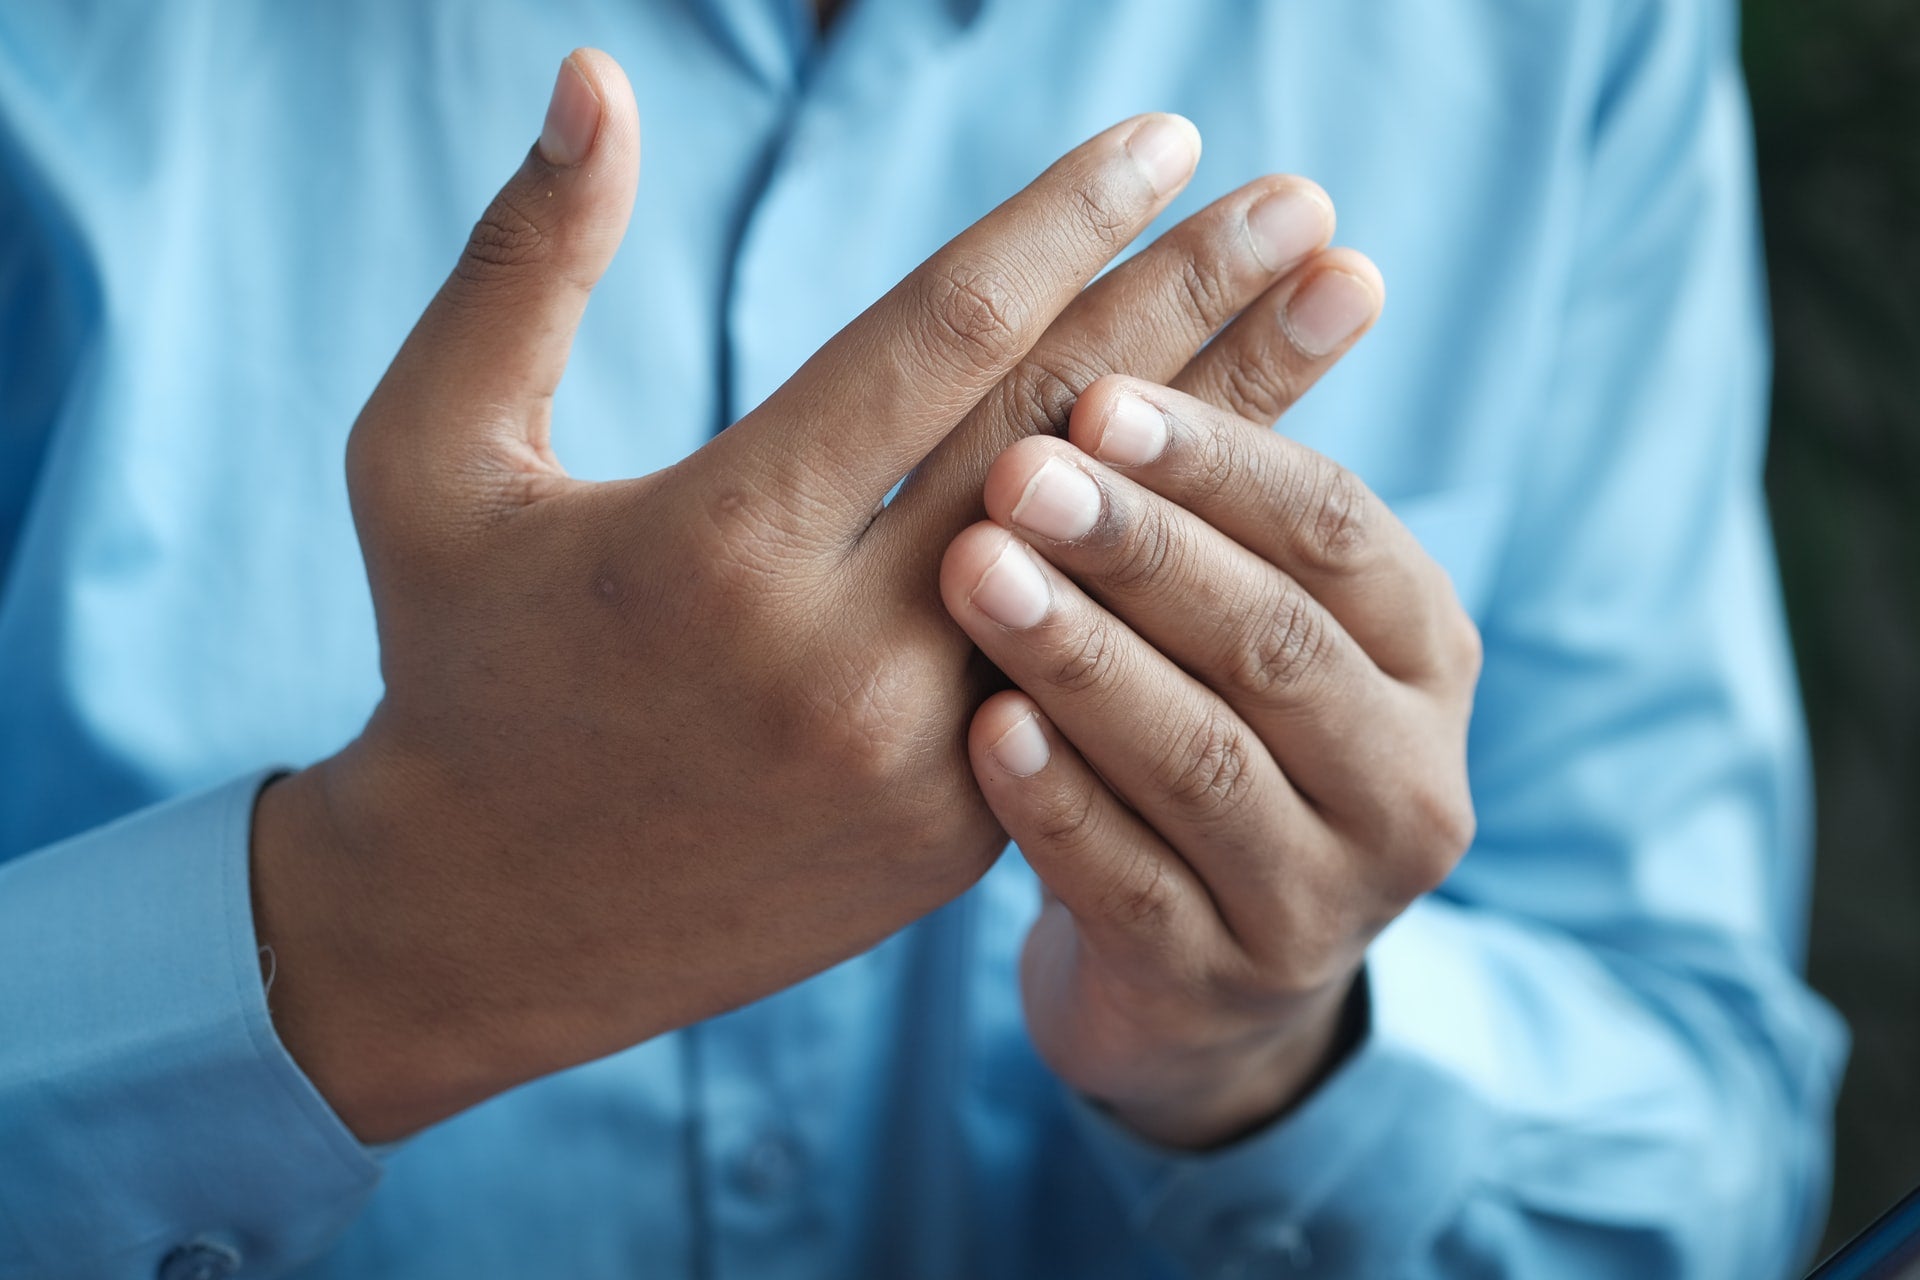 Can Probiotics for Arthritis Pain Provide Relief?